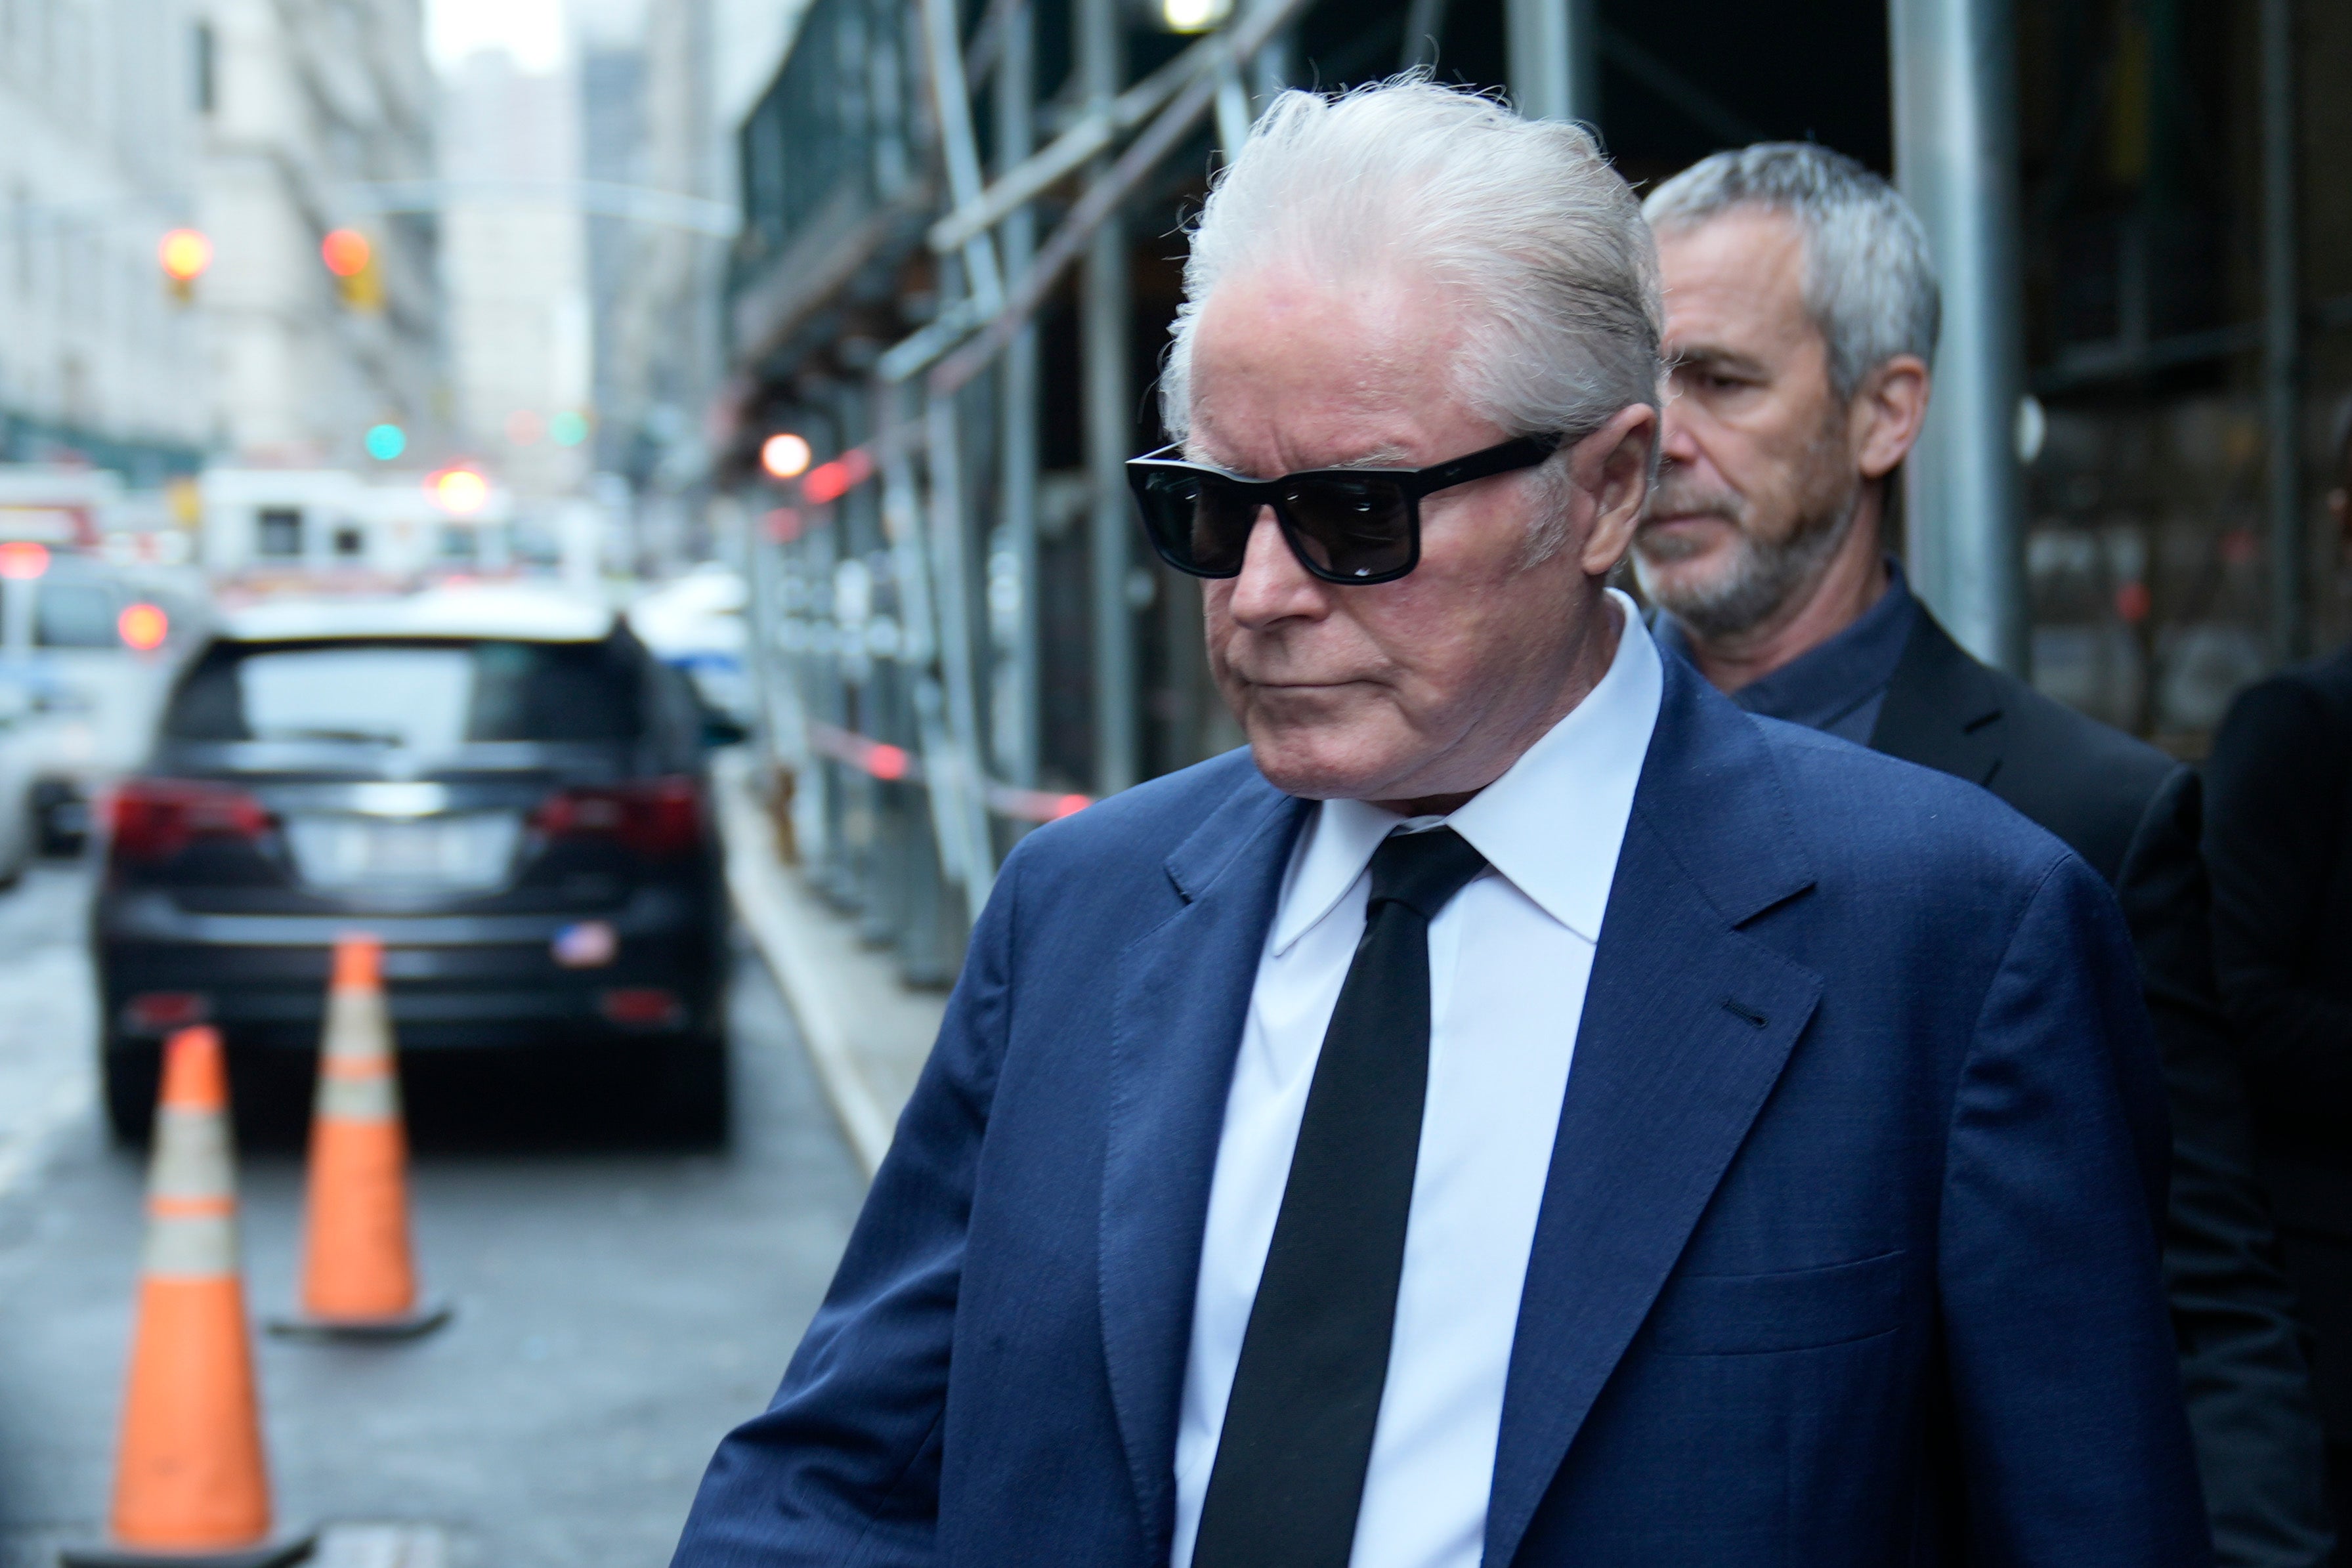 Eagles frontman Don Henley outside court in New York